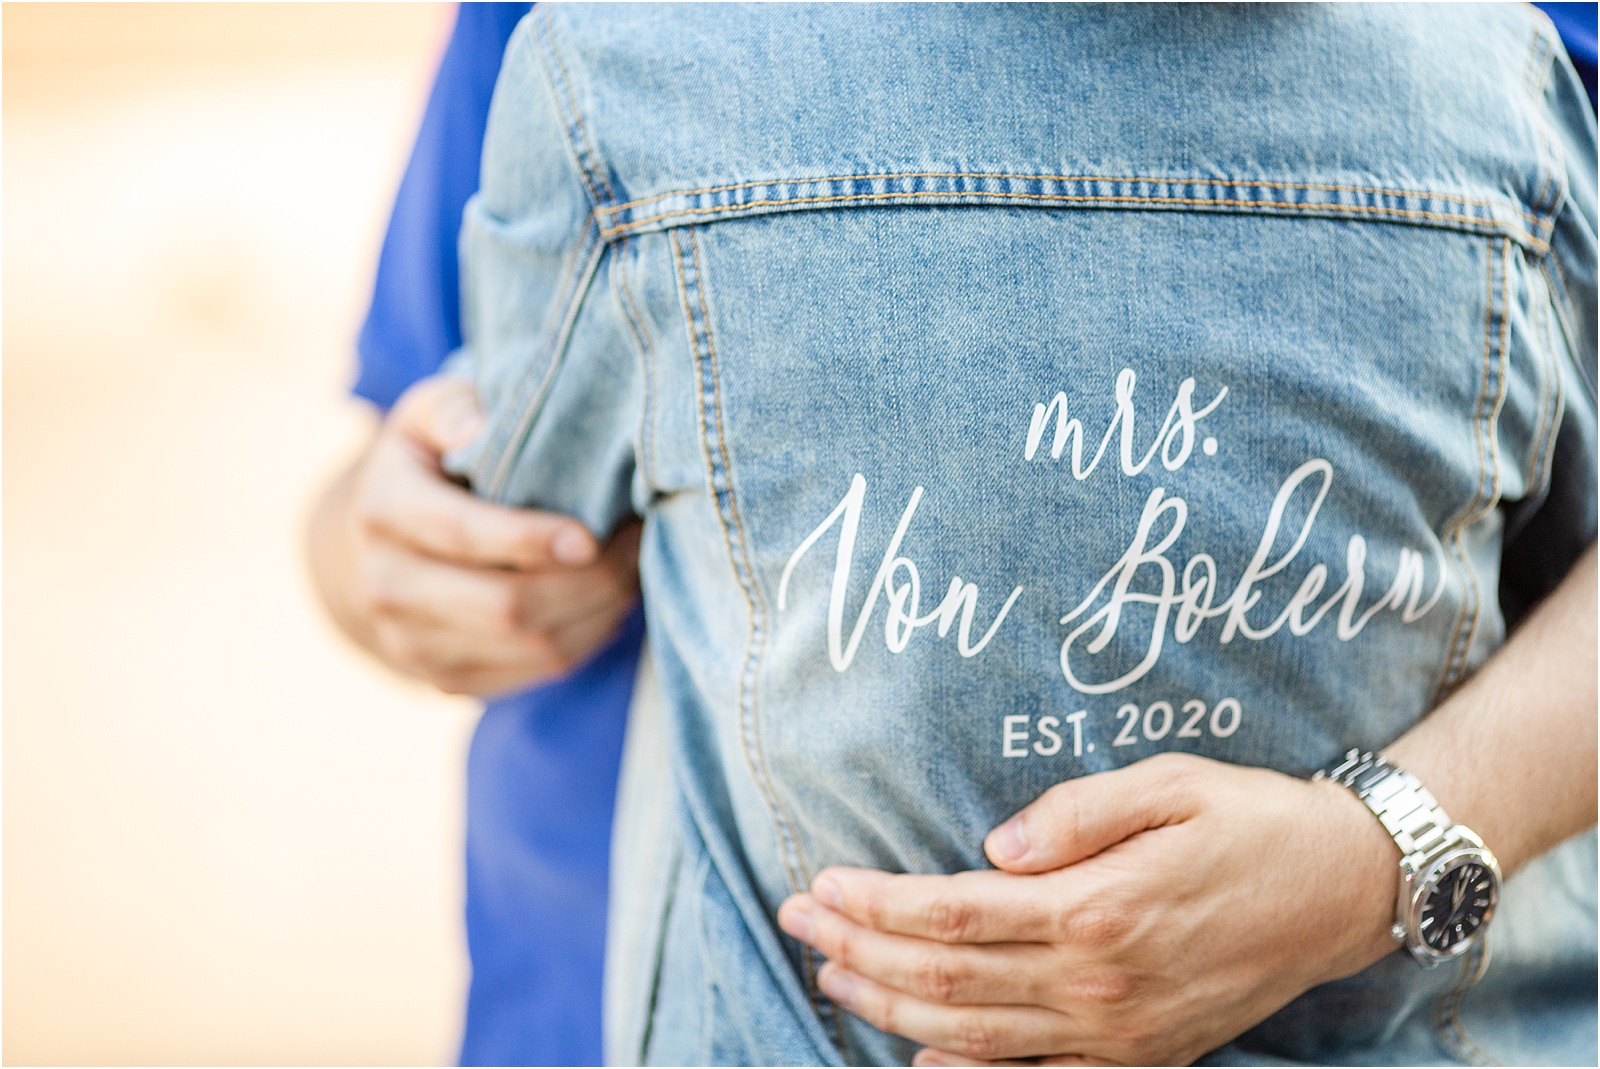 Jean jacket with woman's married last name on it